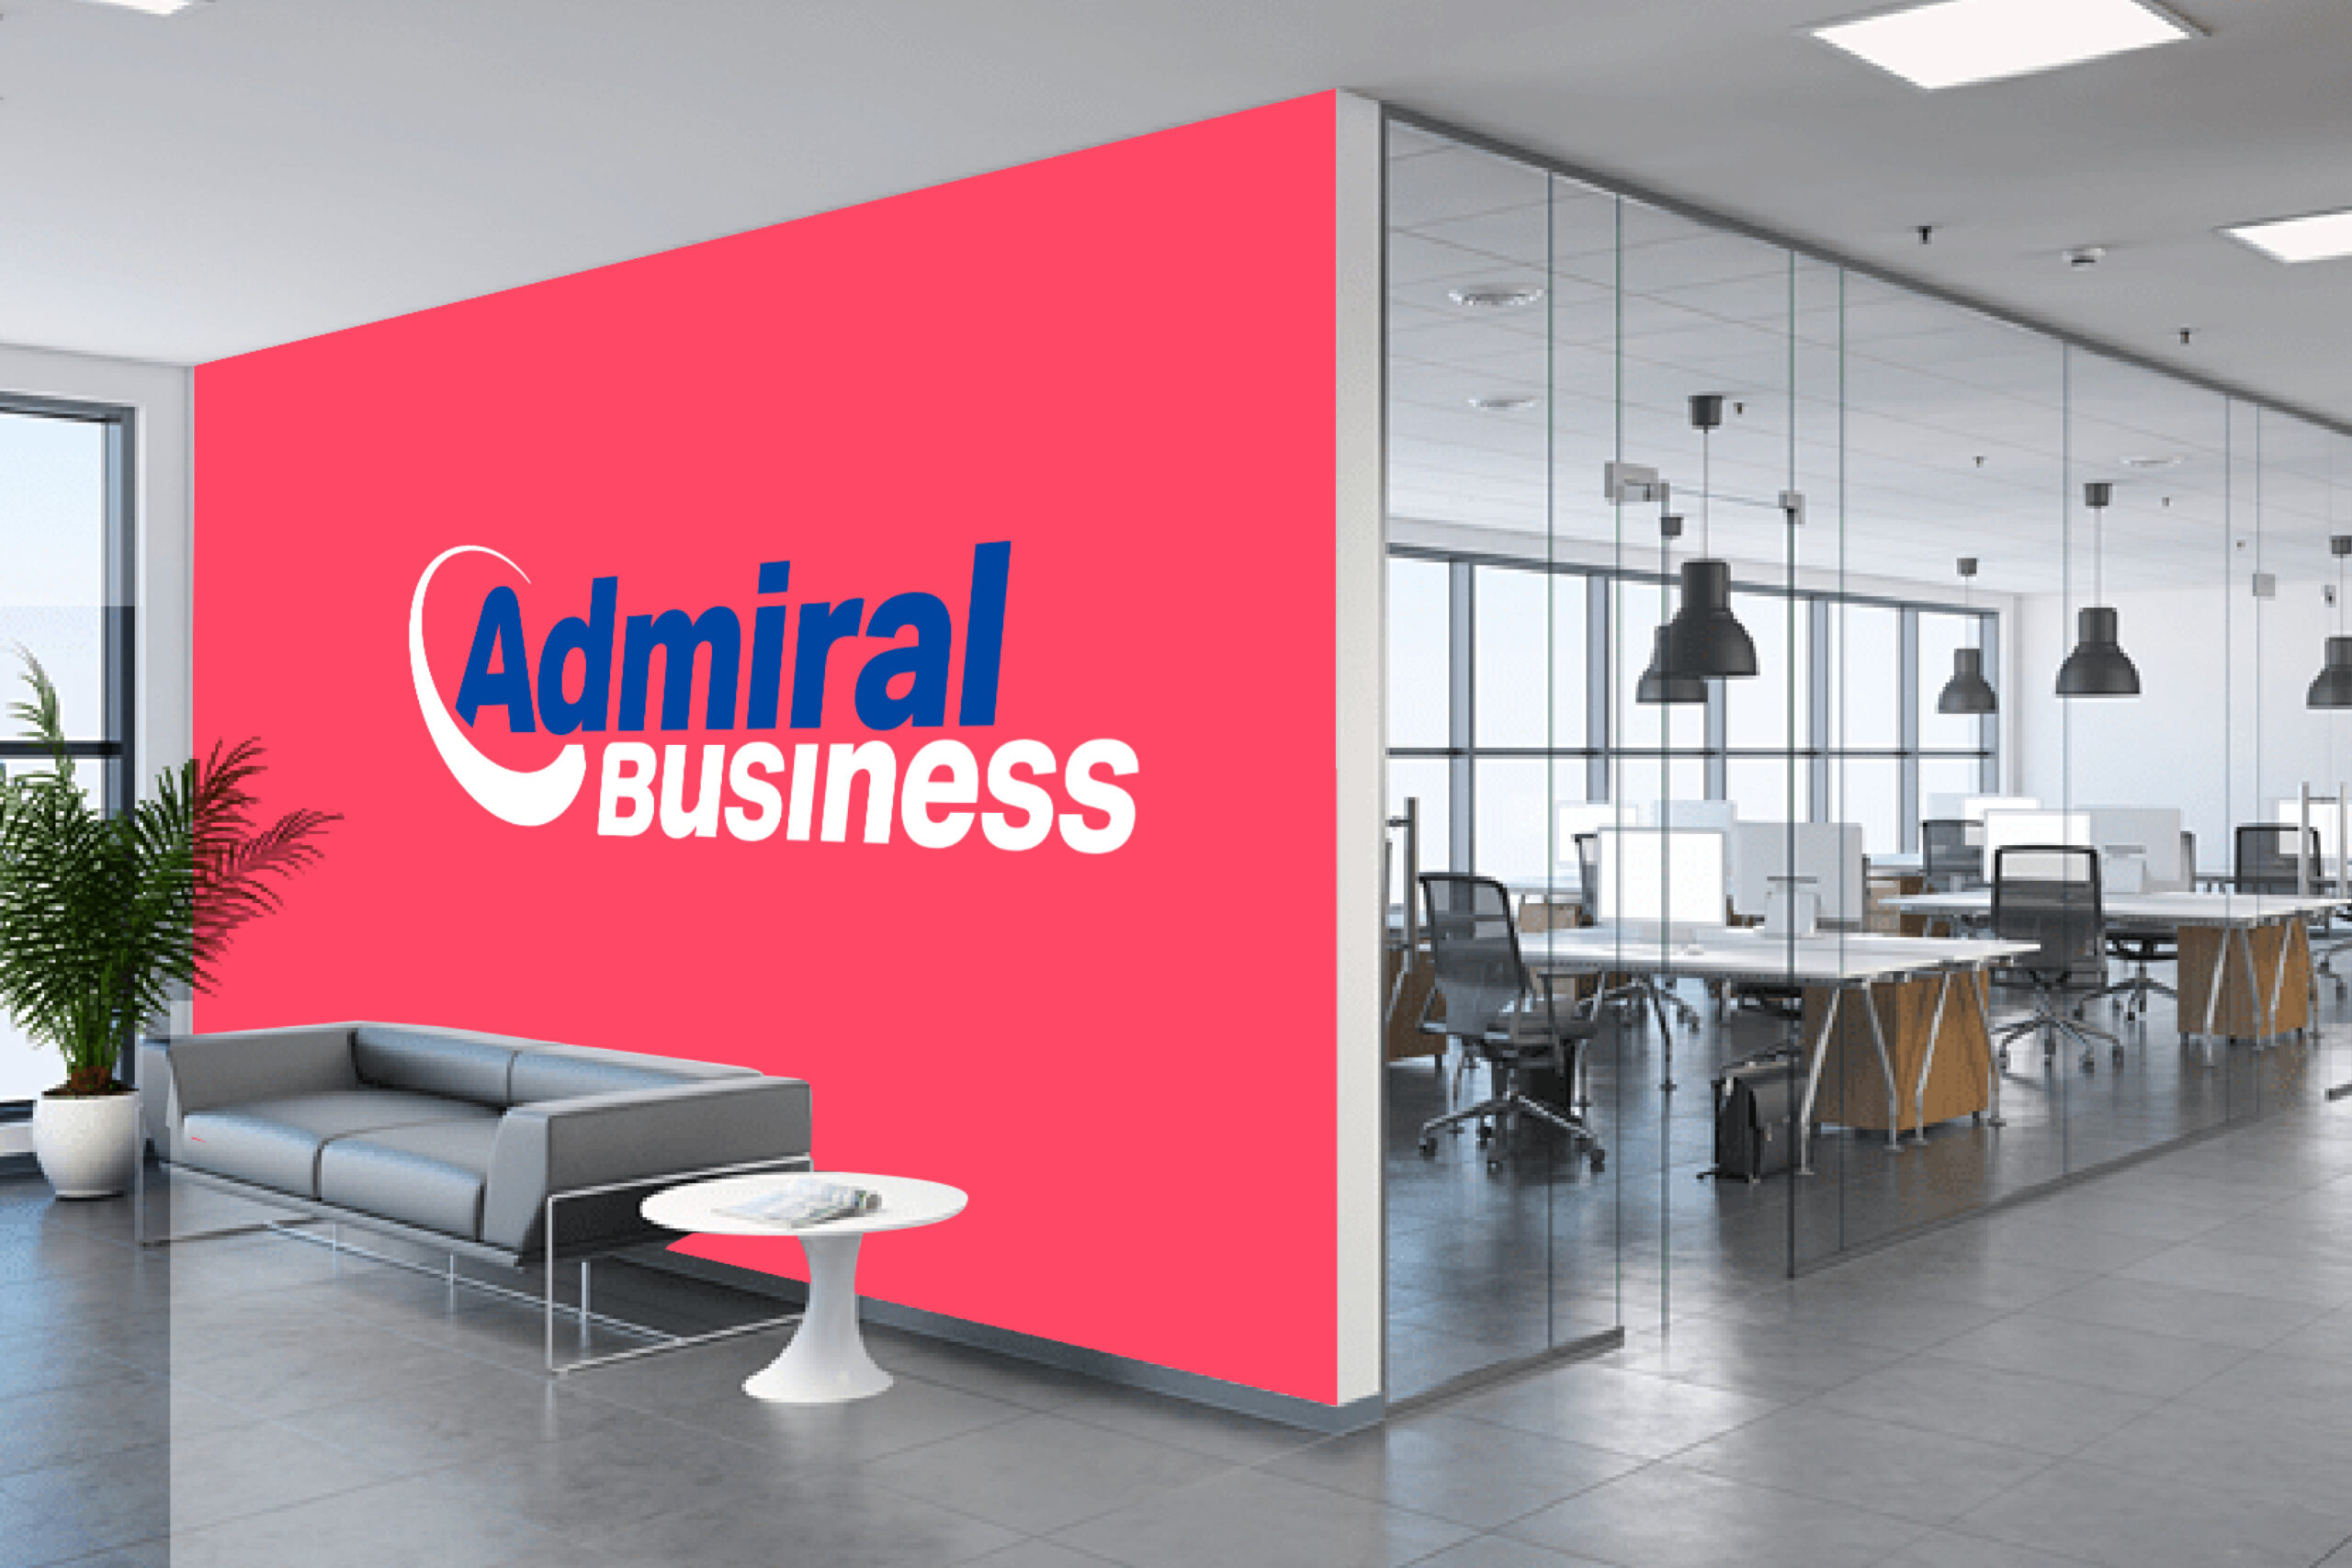 Admiral Business offices